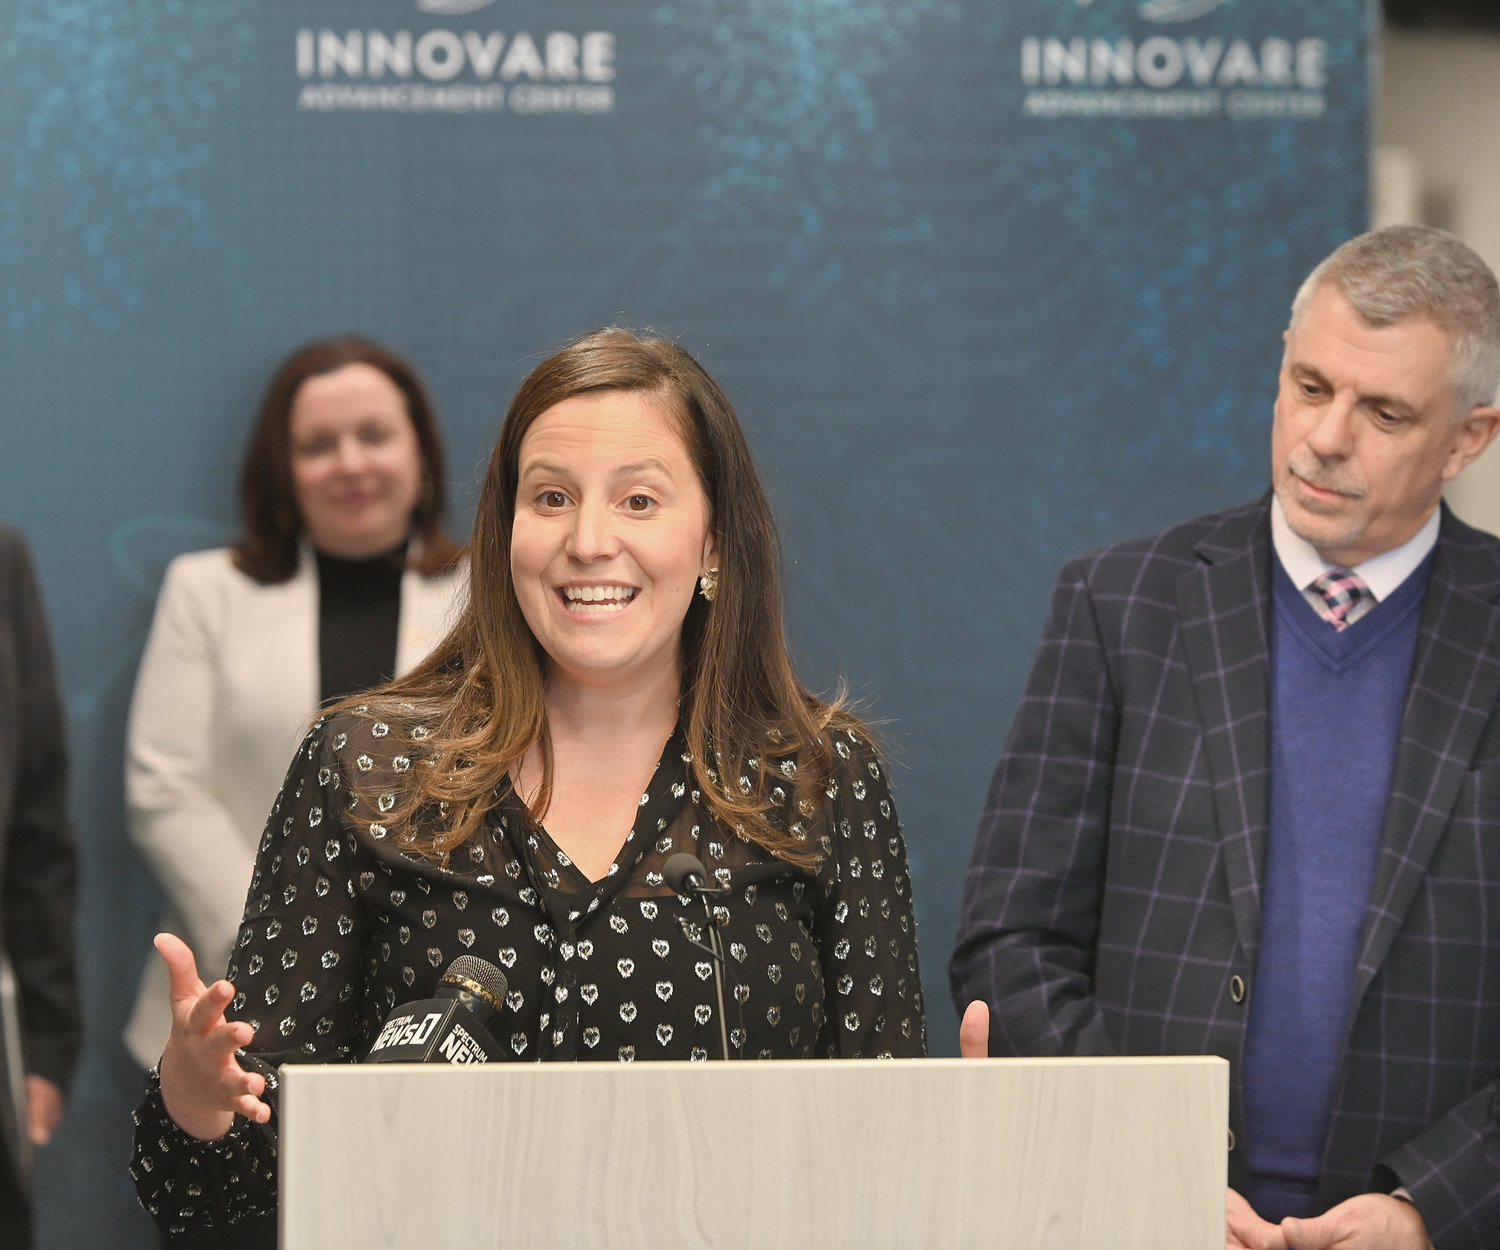 A TOUR AND PROMISE — Congresswoman Elise Stefanik talks during press conference at Innovare Tuesday afternoon, promising to to listen to the concerns of constituents and bring them to the highest levels of government.